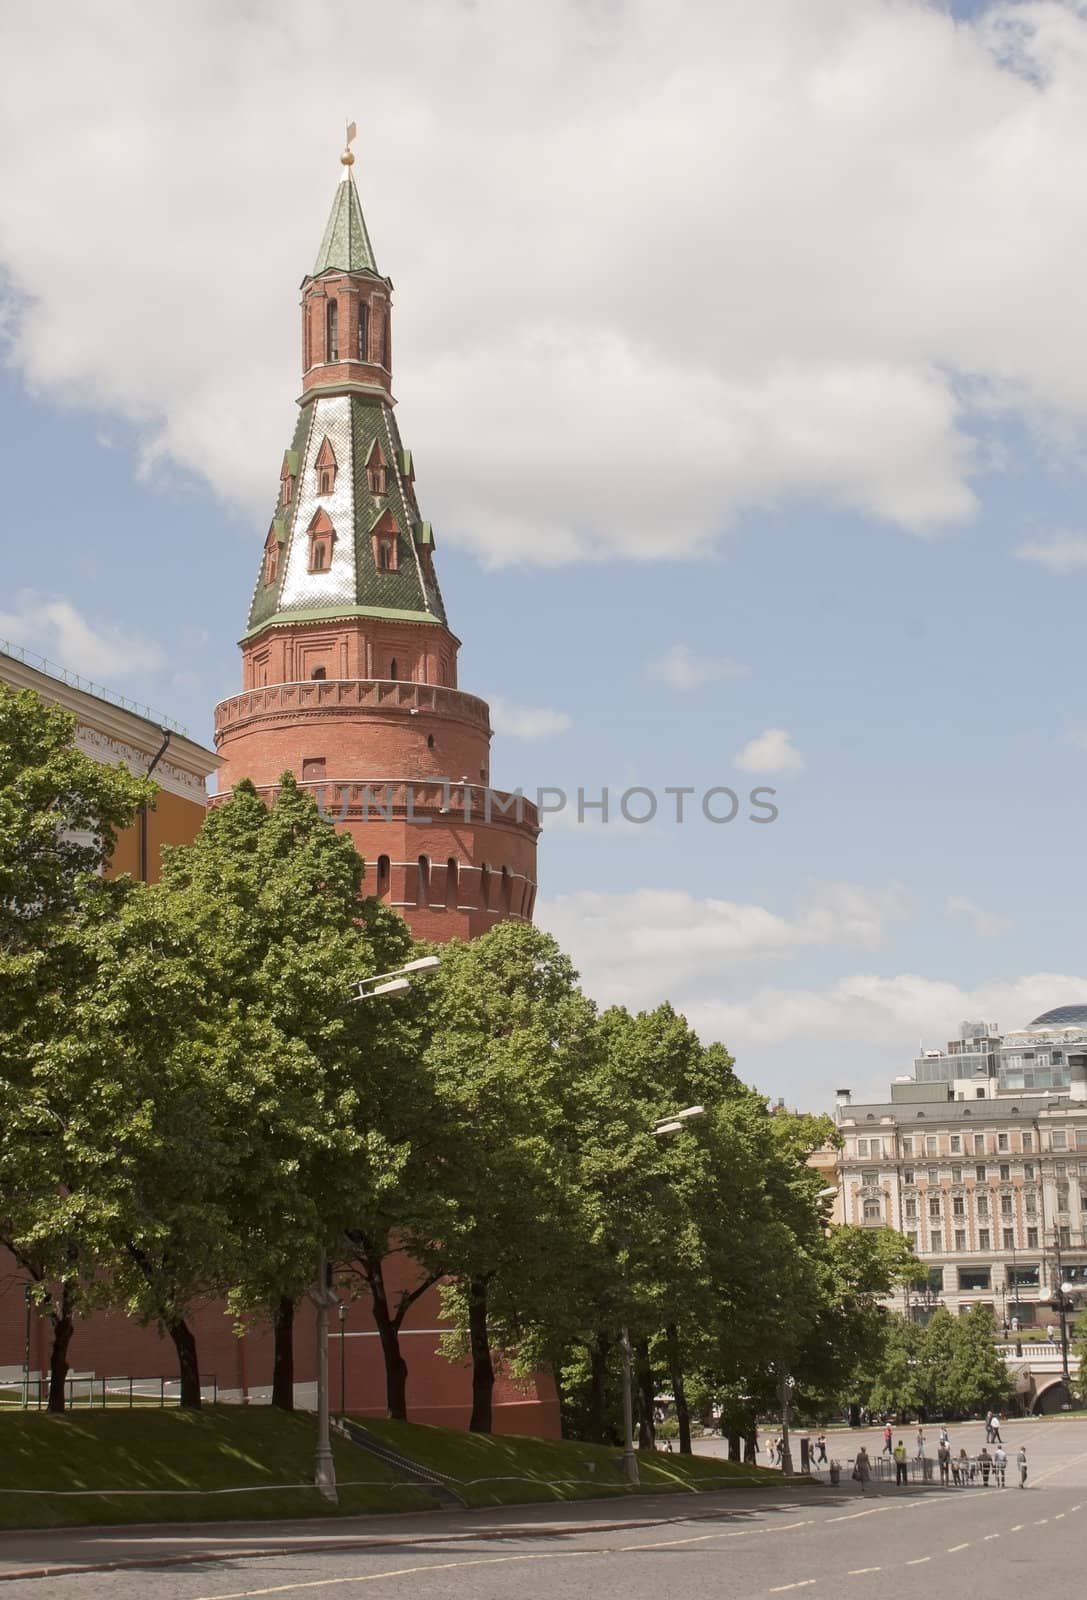 Arsenalnaya tower at Kremlin in Moscow, Russia by AndreyKr